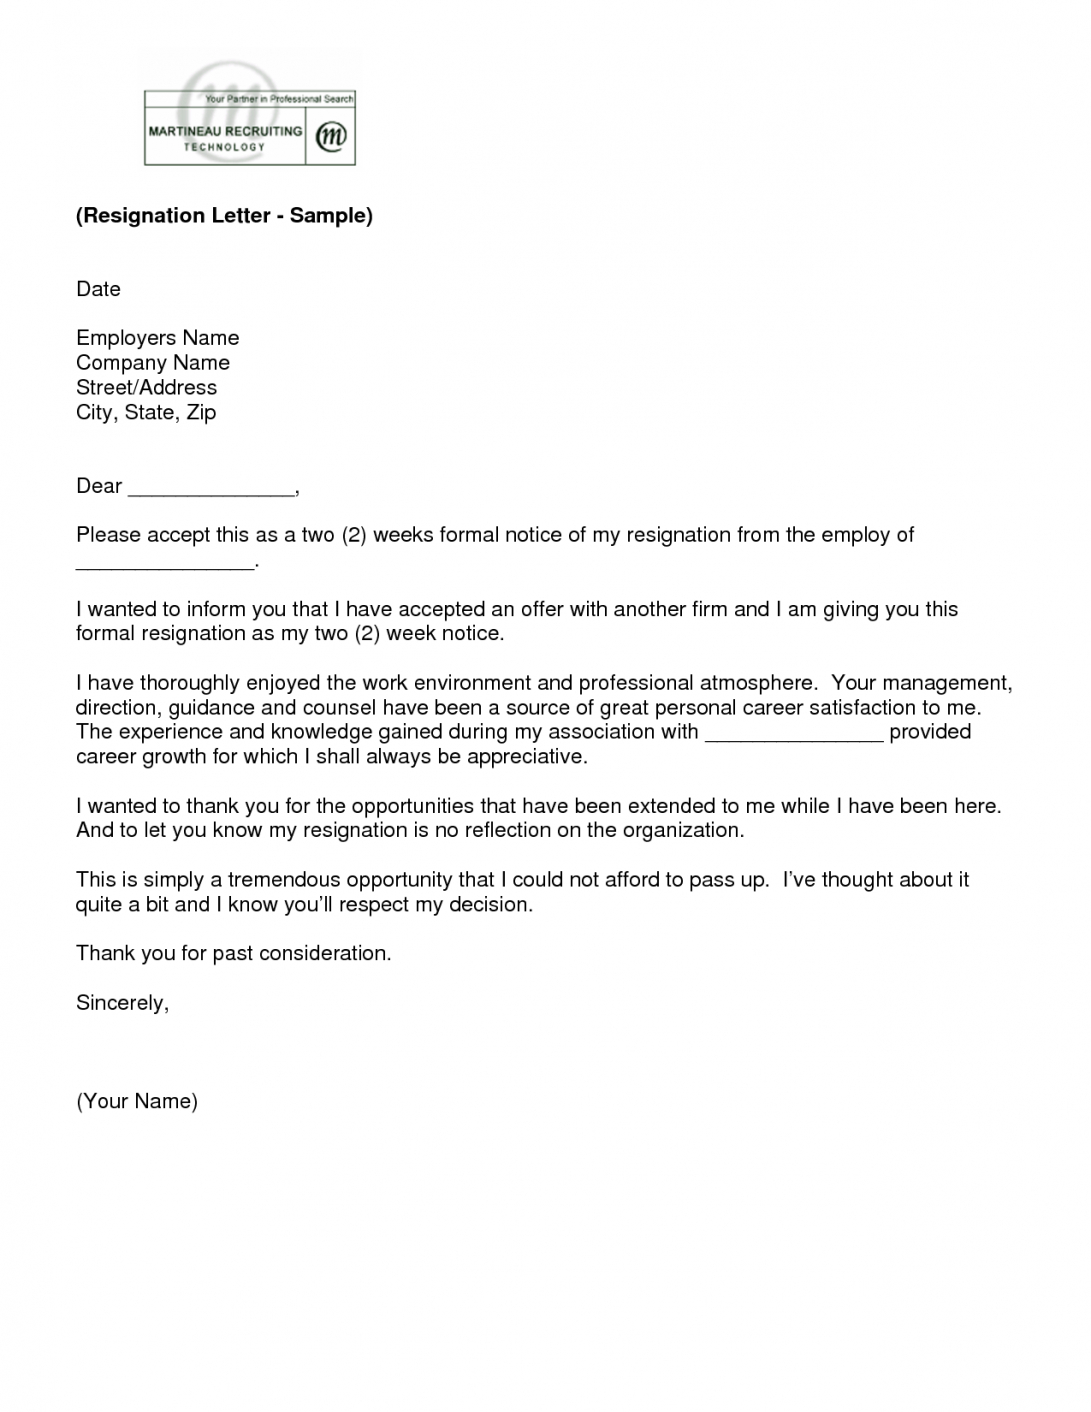 Letter Of Resignation 2 Weeks Notice Template Employee In 2 Weeks Notice Template Word